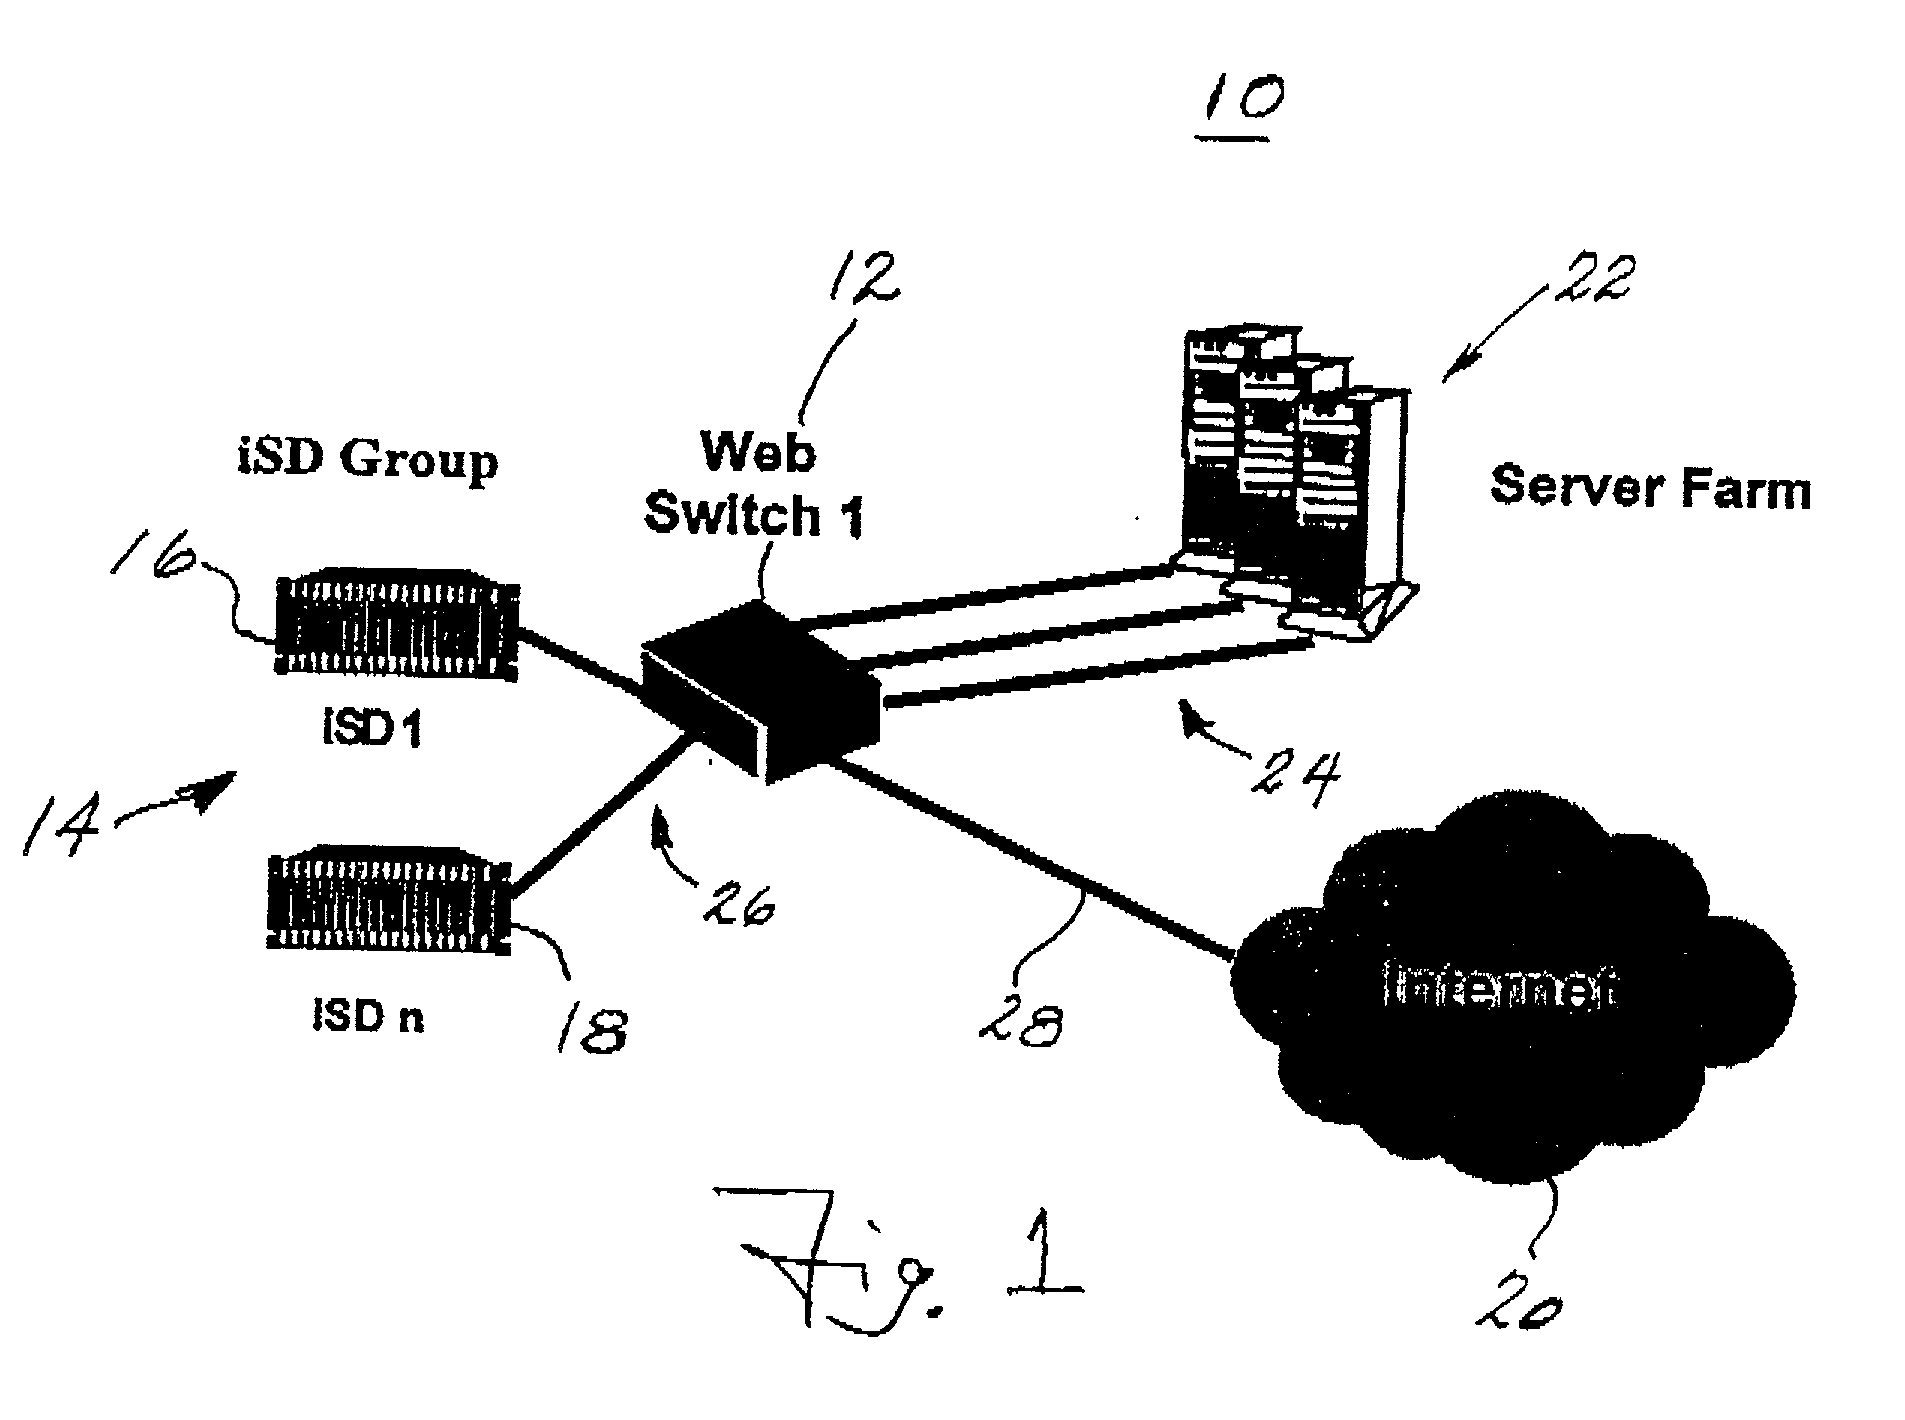 Interactive control of network devices